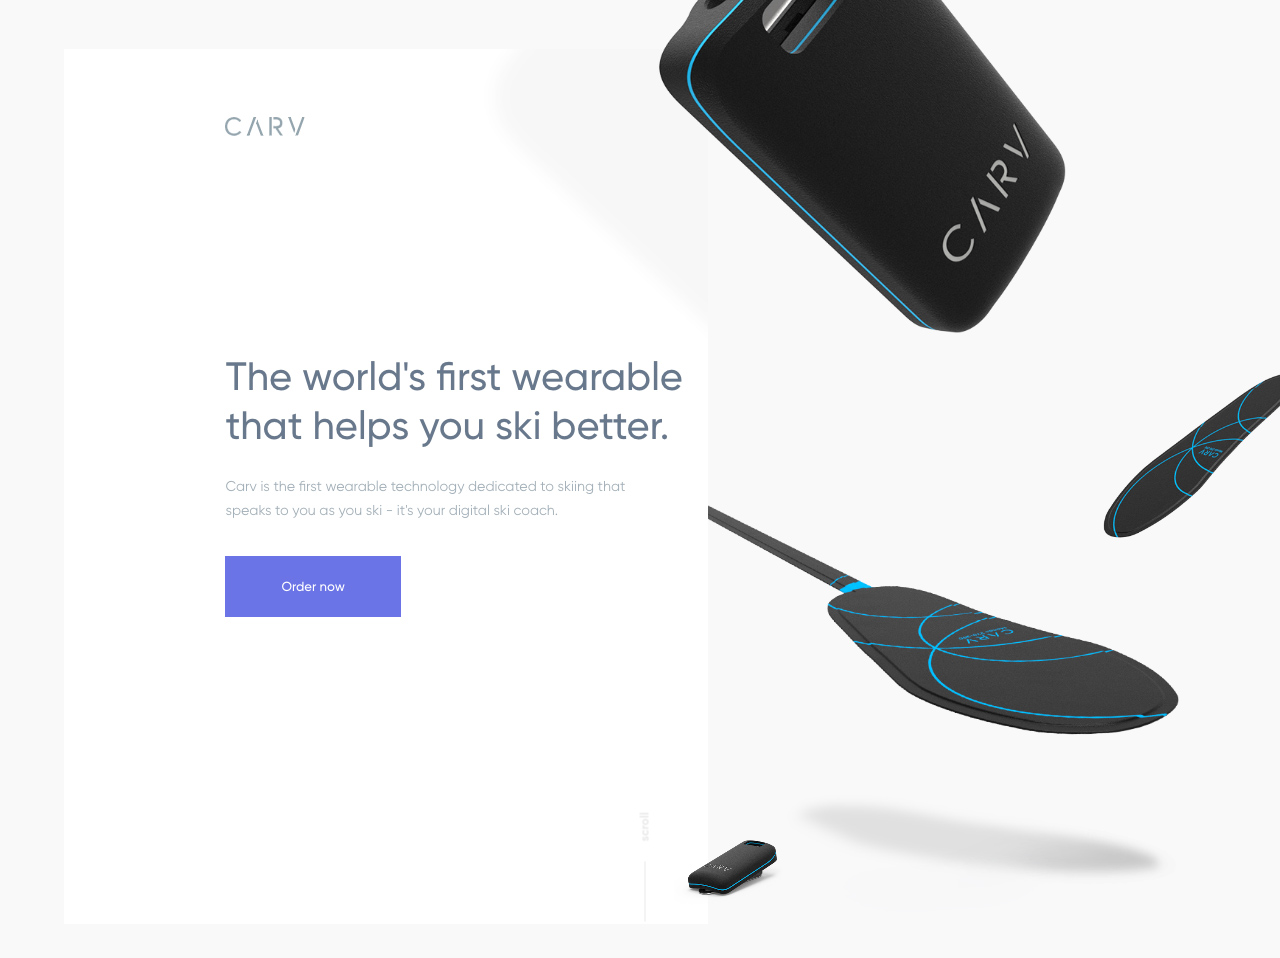 Carv: The world’s first wearable that helps you ski better!